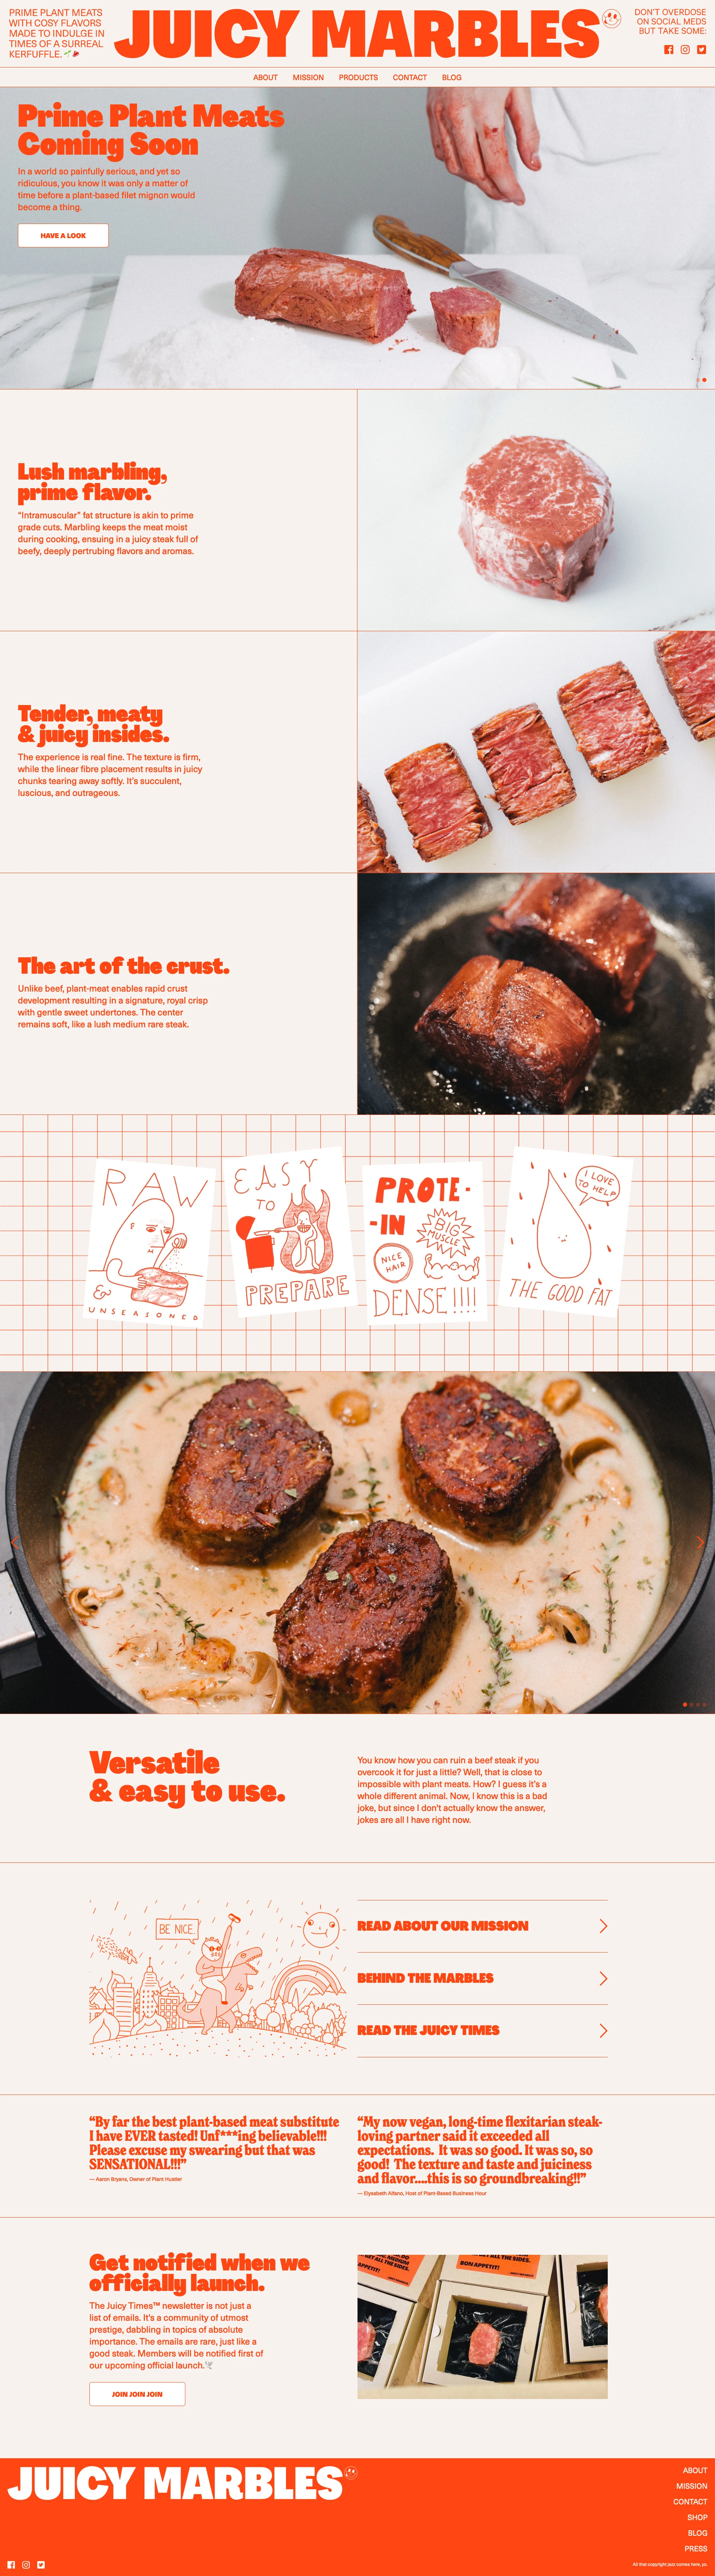 Juicy Marbles Landing Page Example: Prime Plant Meats